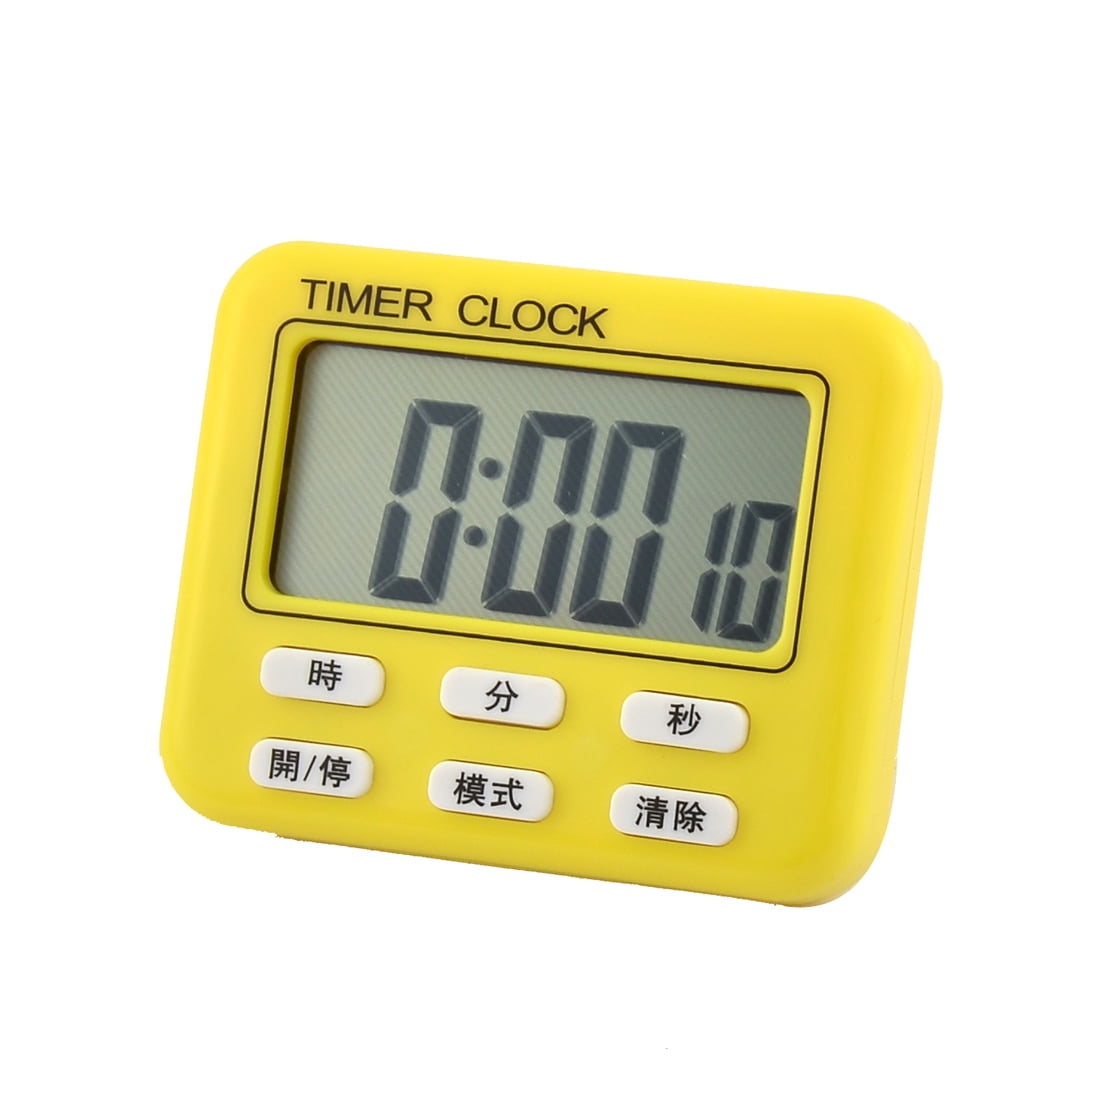 ABS Kitchen Battery Powered LCD Digital Count Down Up Timer Clock Alarm Yellow